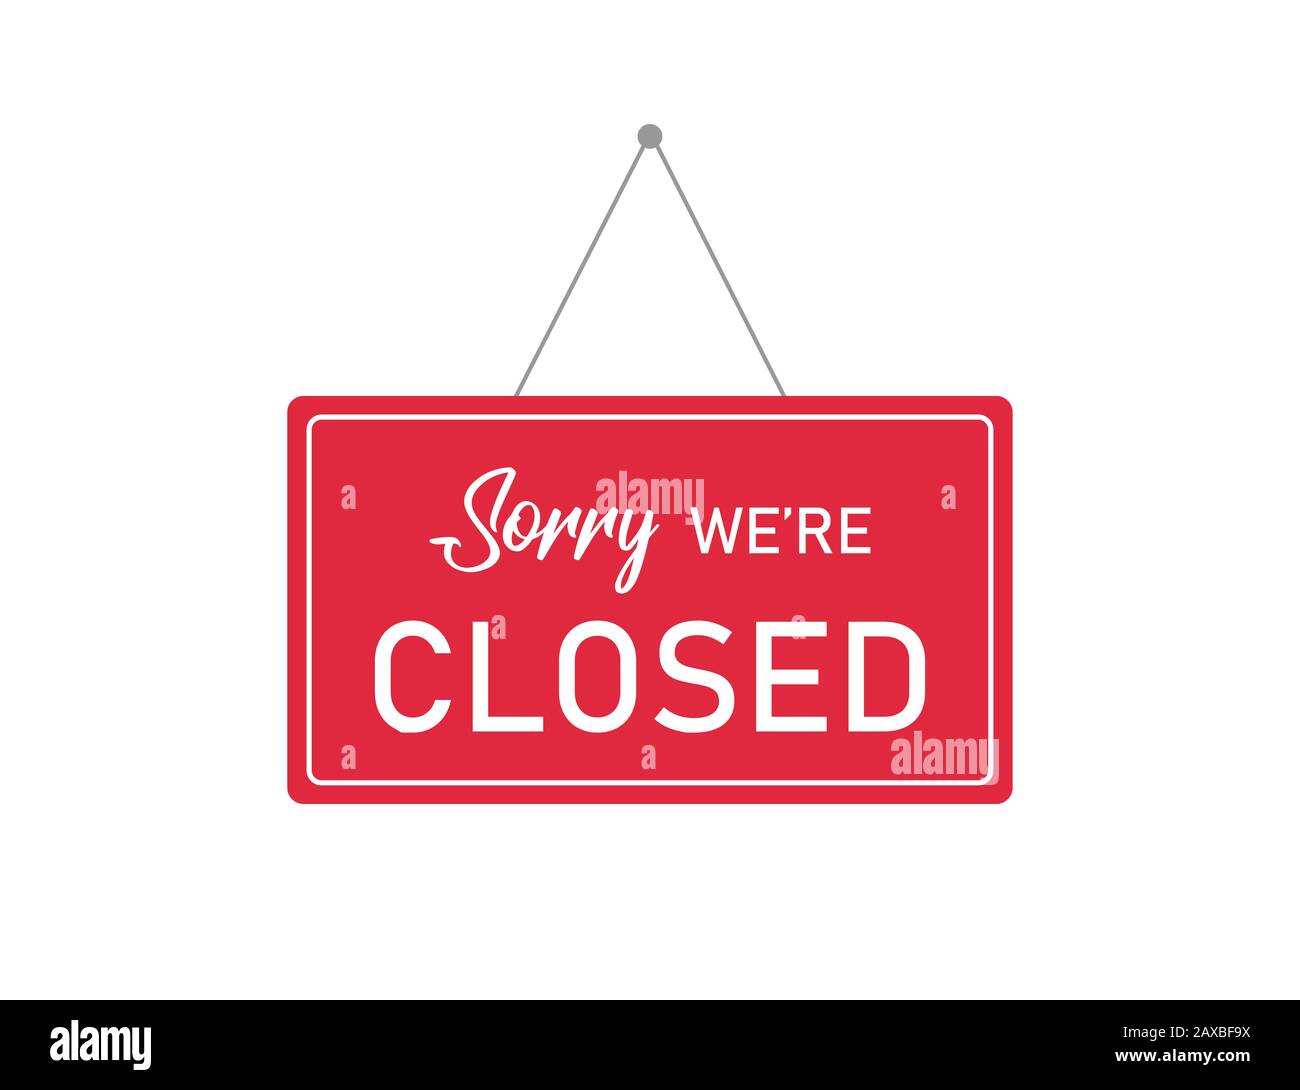 Sorry we're closed sign on red border. Vintage symbol. Decoration element isolated. EPS 10 Stock Photo